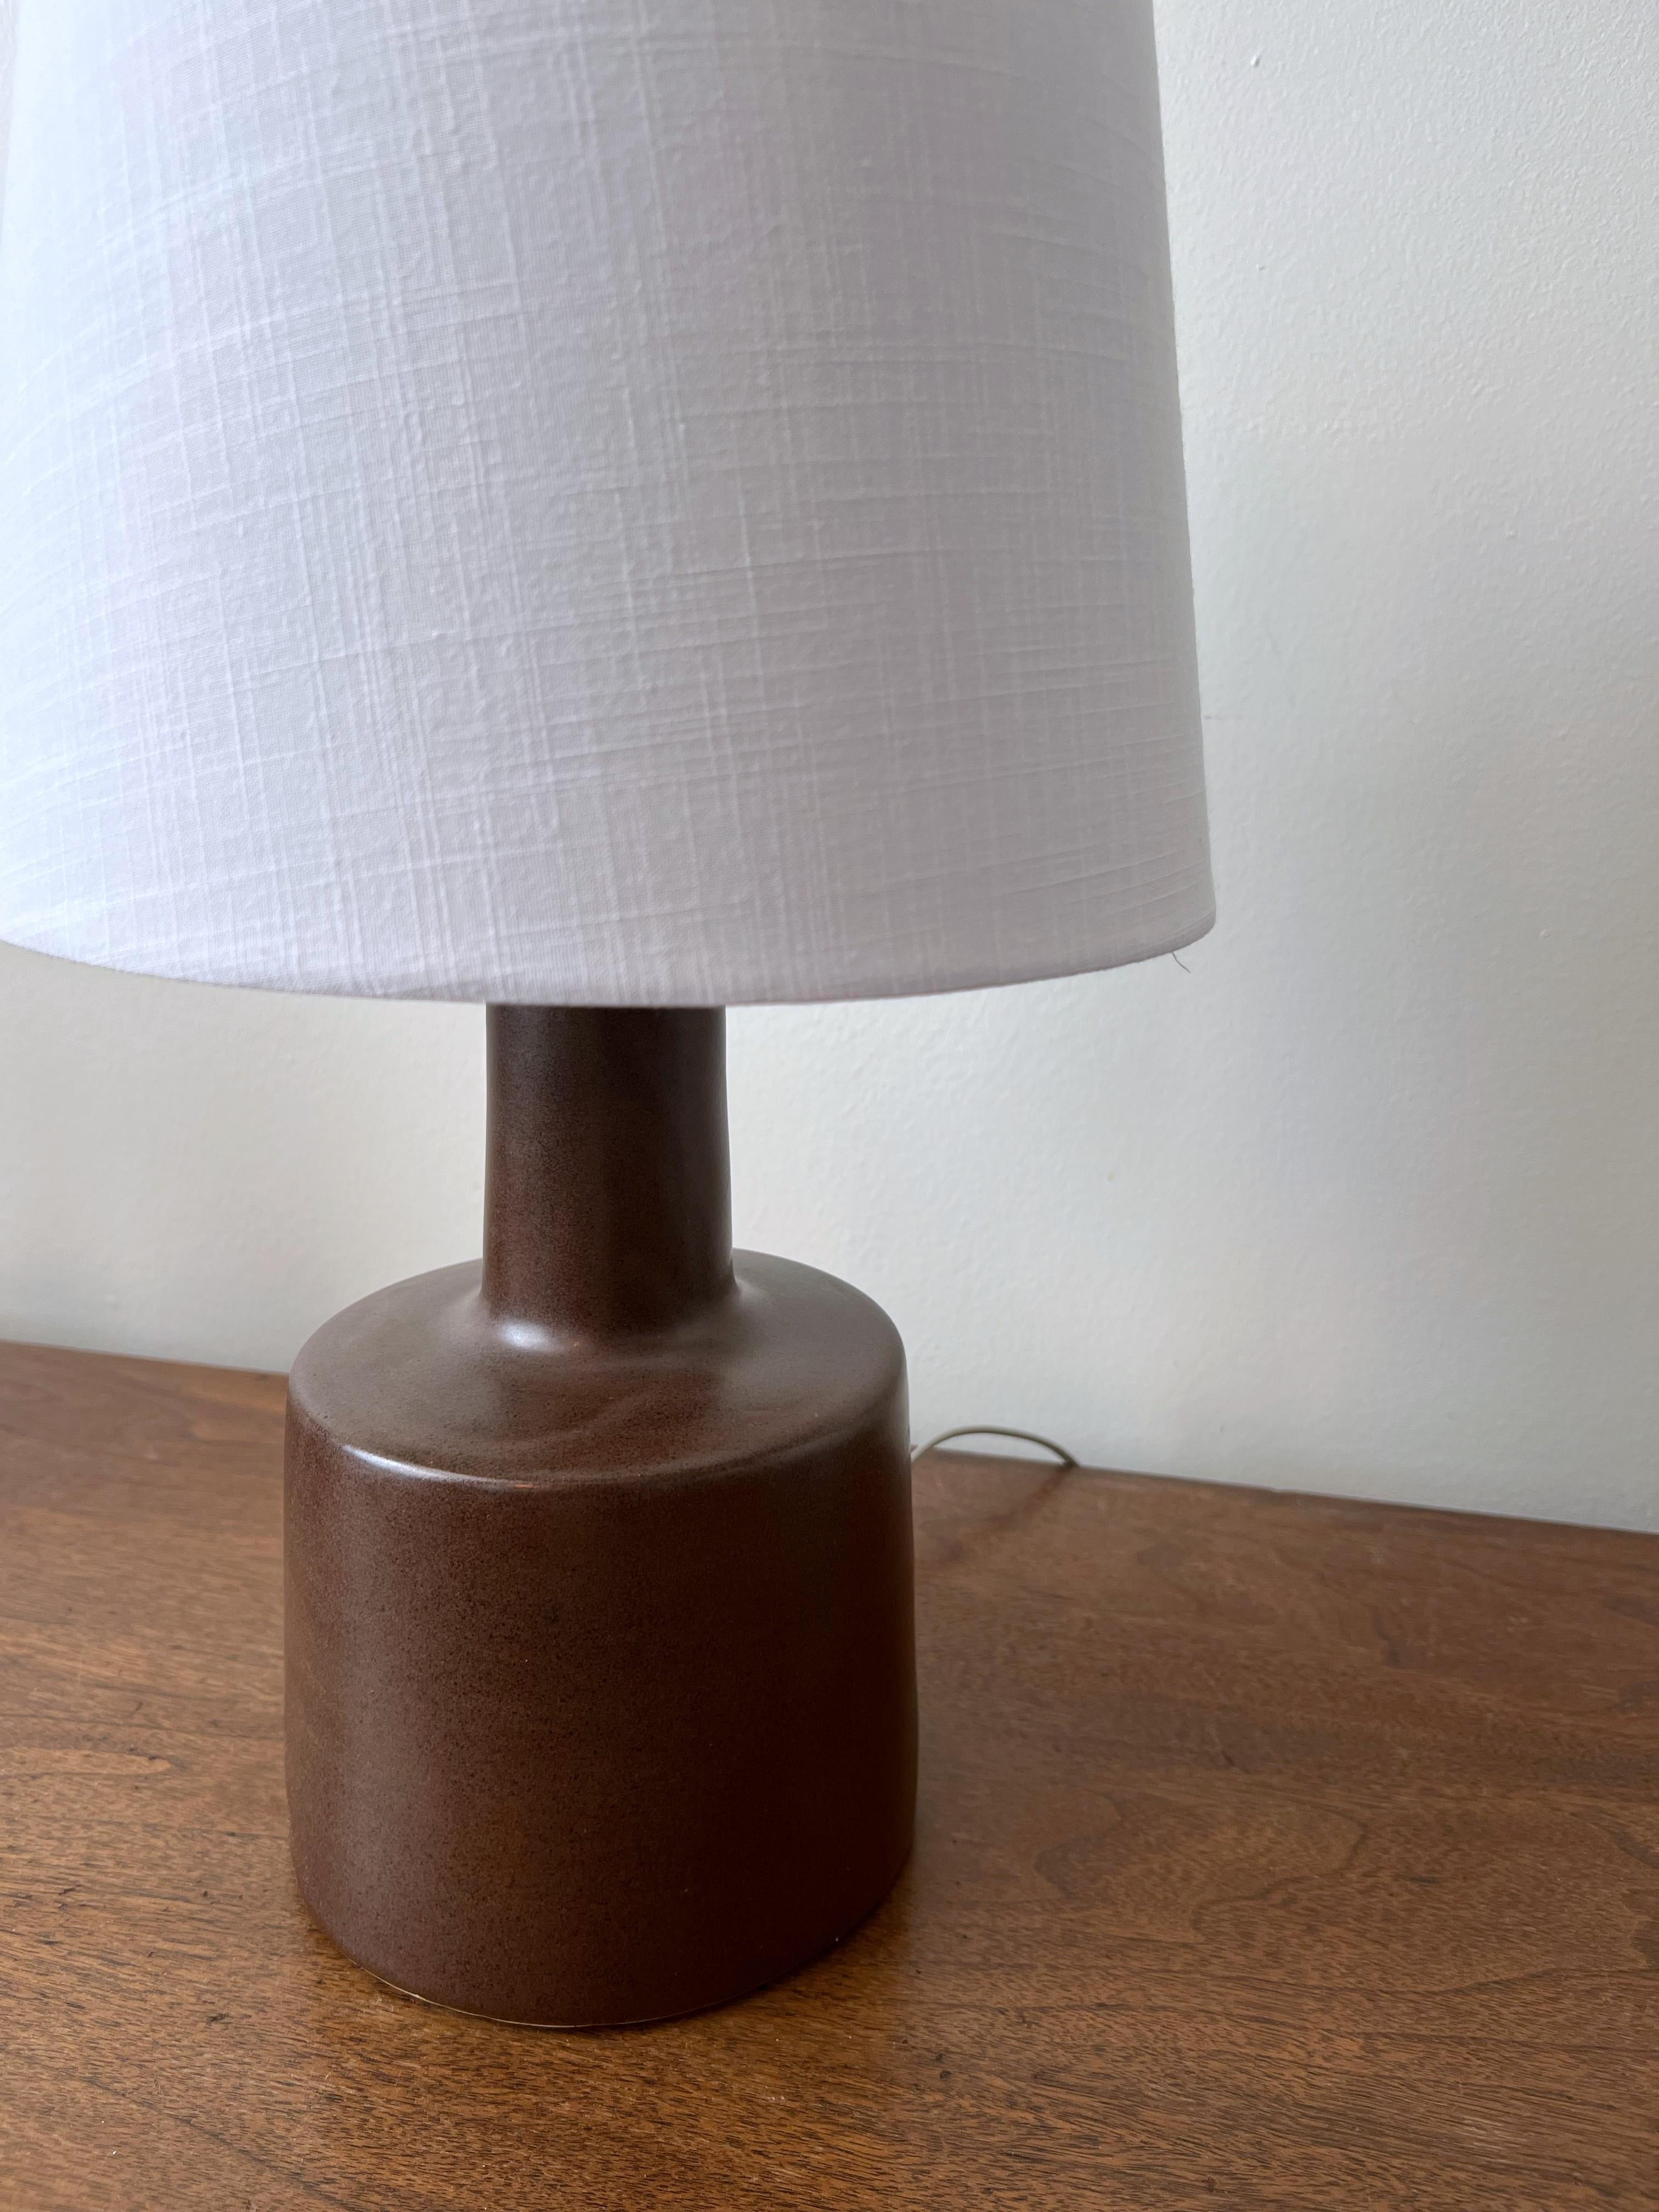 This minimalist organic table lamp is designed by the famed husband and wife duo, Jane & Gordon Martz. The color is a speckled earth tone brown with a lovely delicate aged patina. The base is signed. 

Jane & Gordon Martz works are highly sought